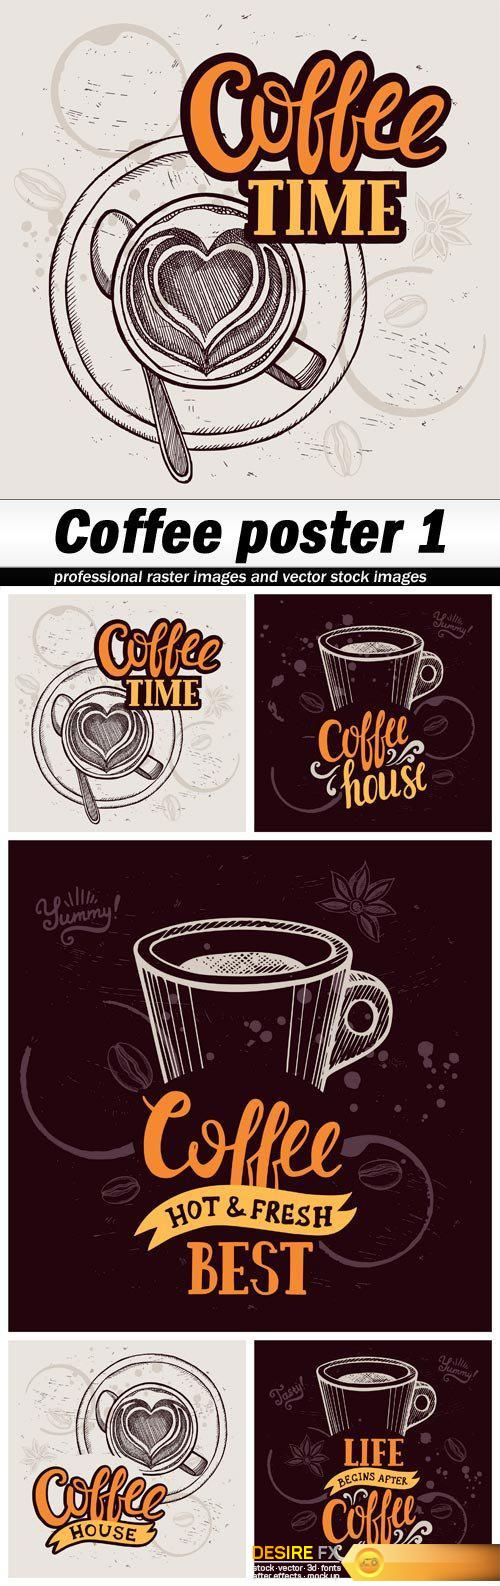 Coffee poster 1 - 5 EPS